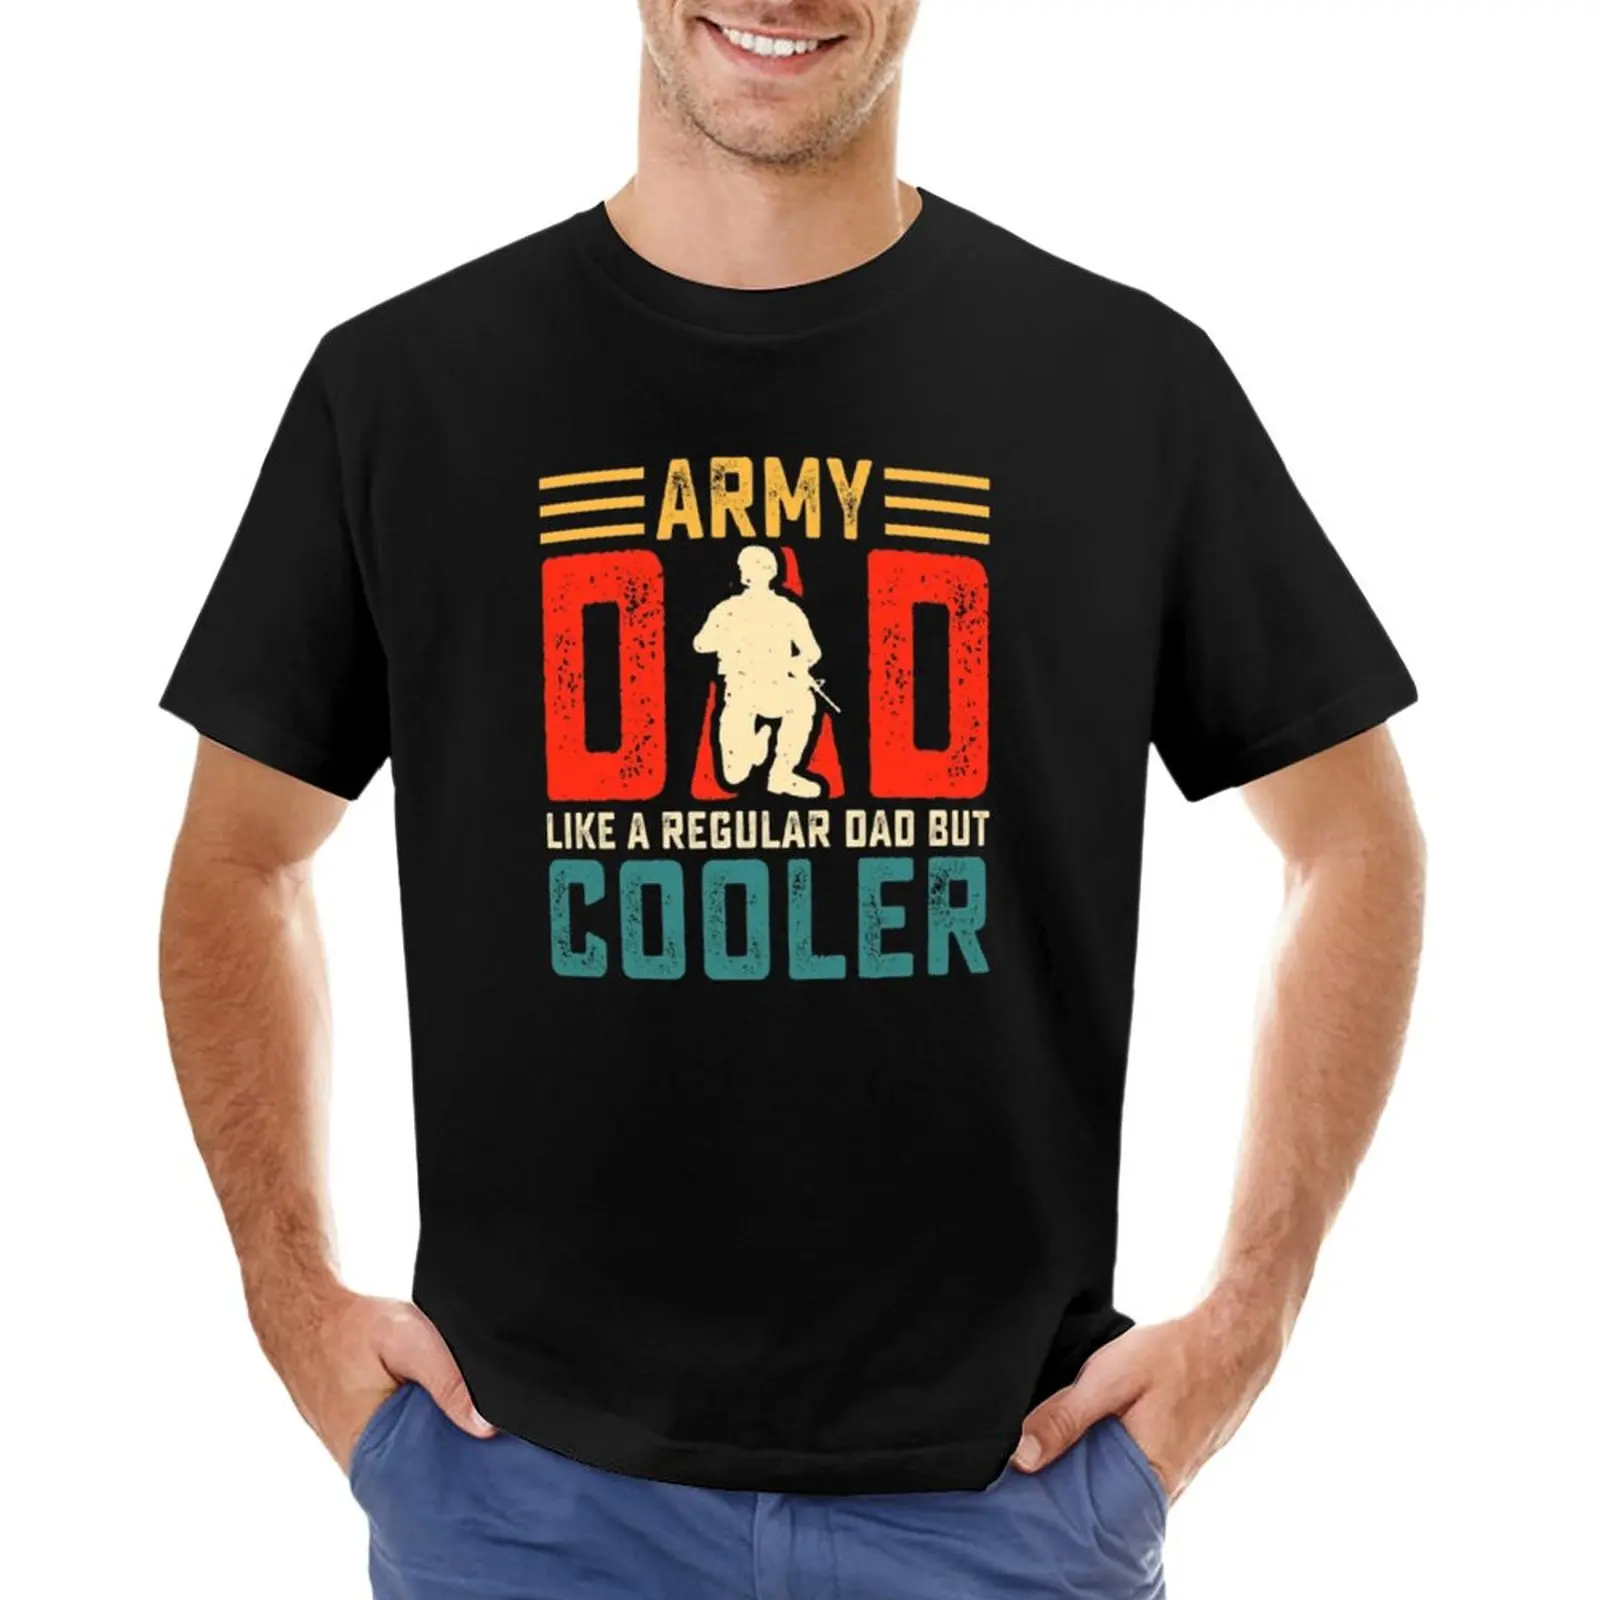 

Army Dad Like a Regular Dad but Cooler T-Shirt funny t shirts t shirts for men graphic